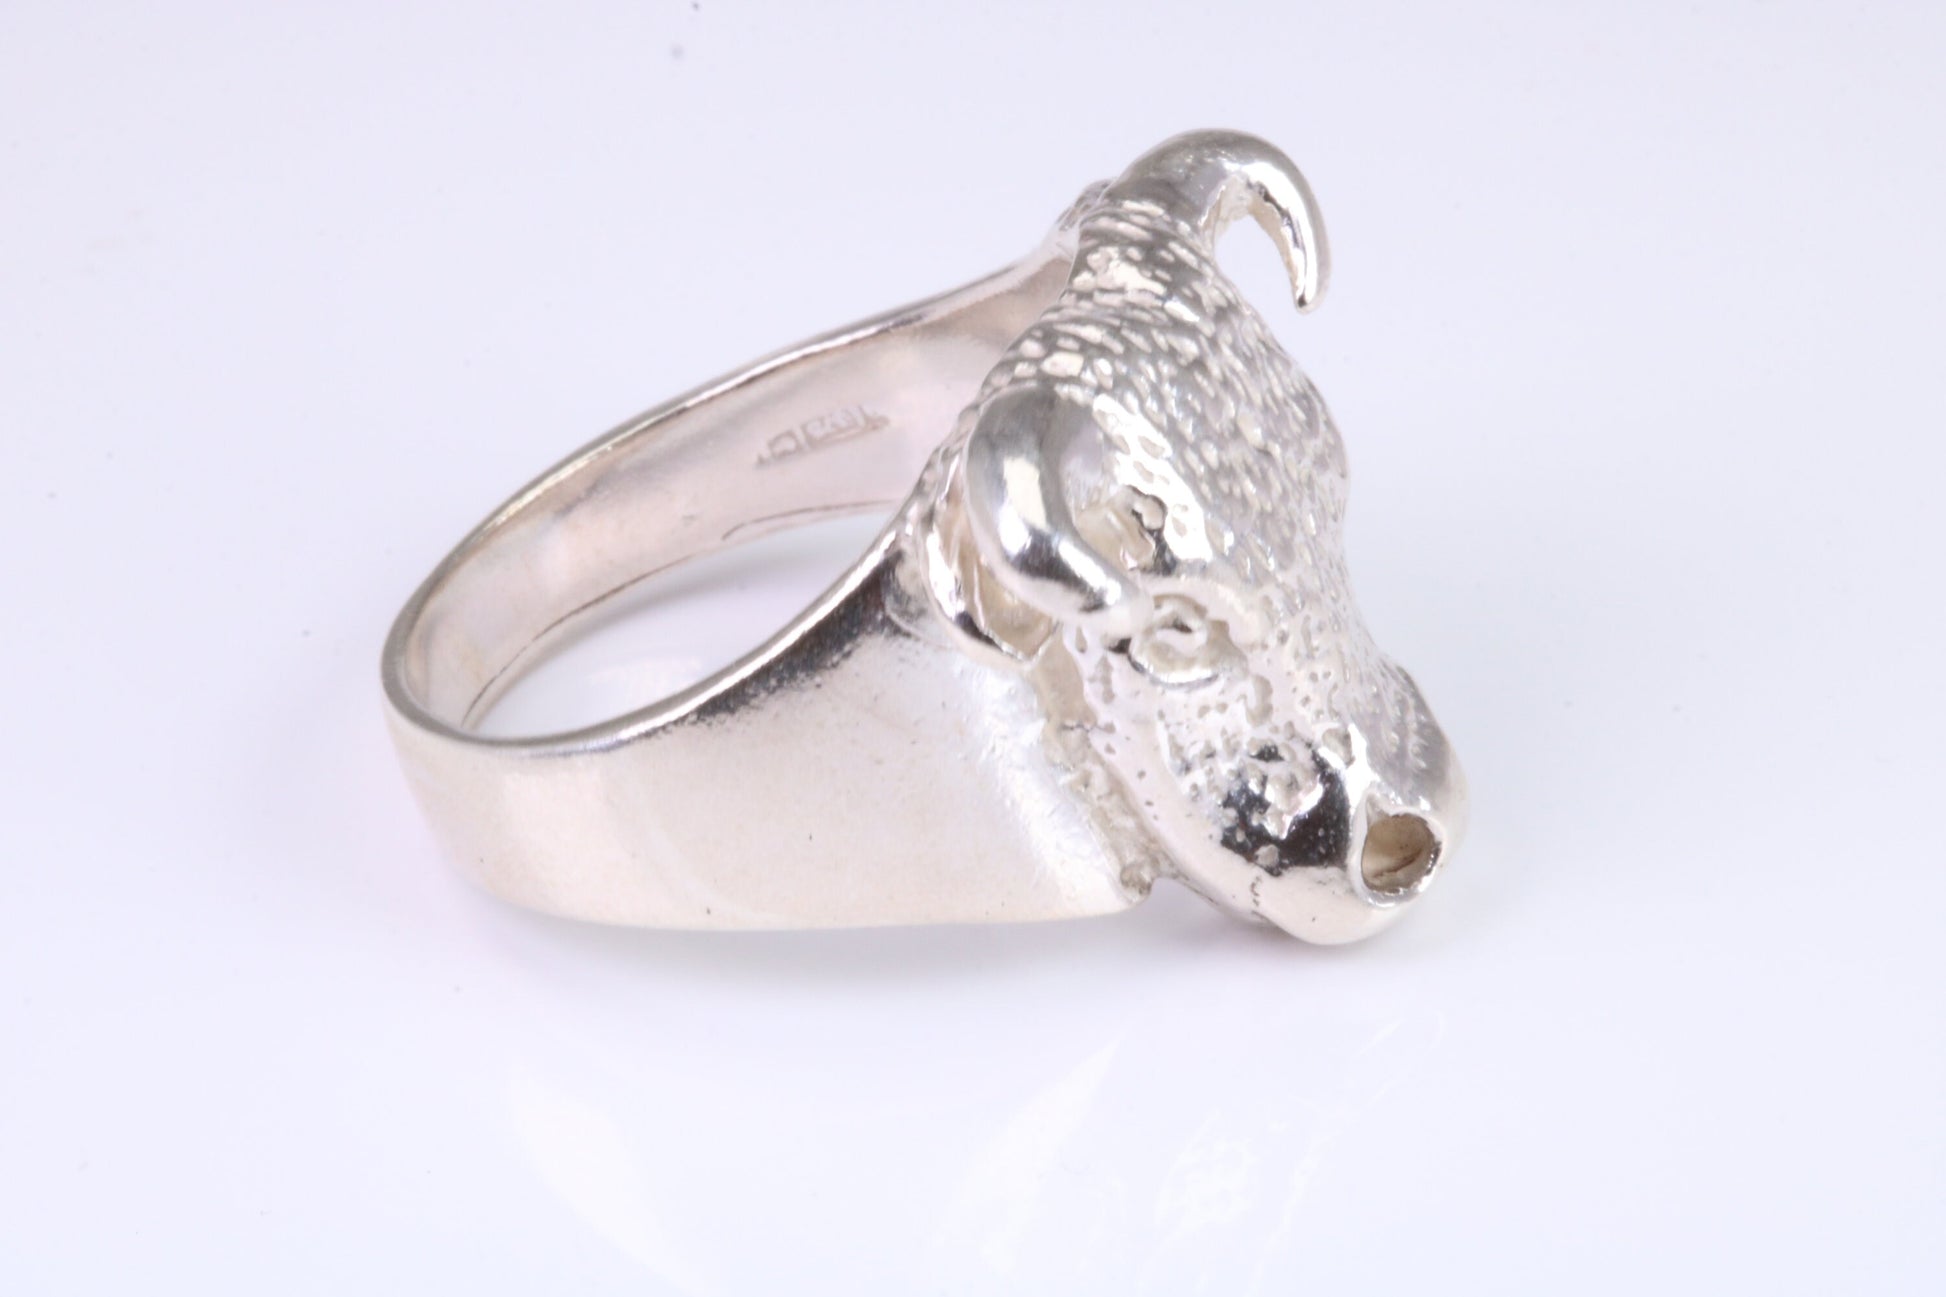 Very large and heavy Bulls head ring,solid silver, perfect for ladies and gents. Available in silver, yellow gold, white gold and platinum